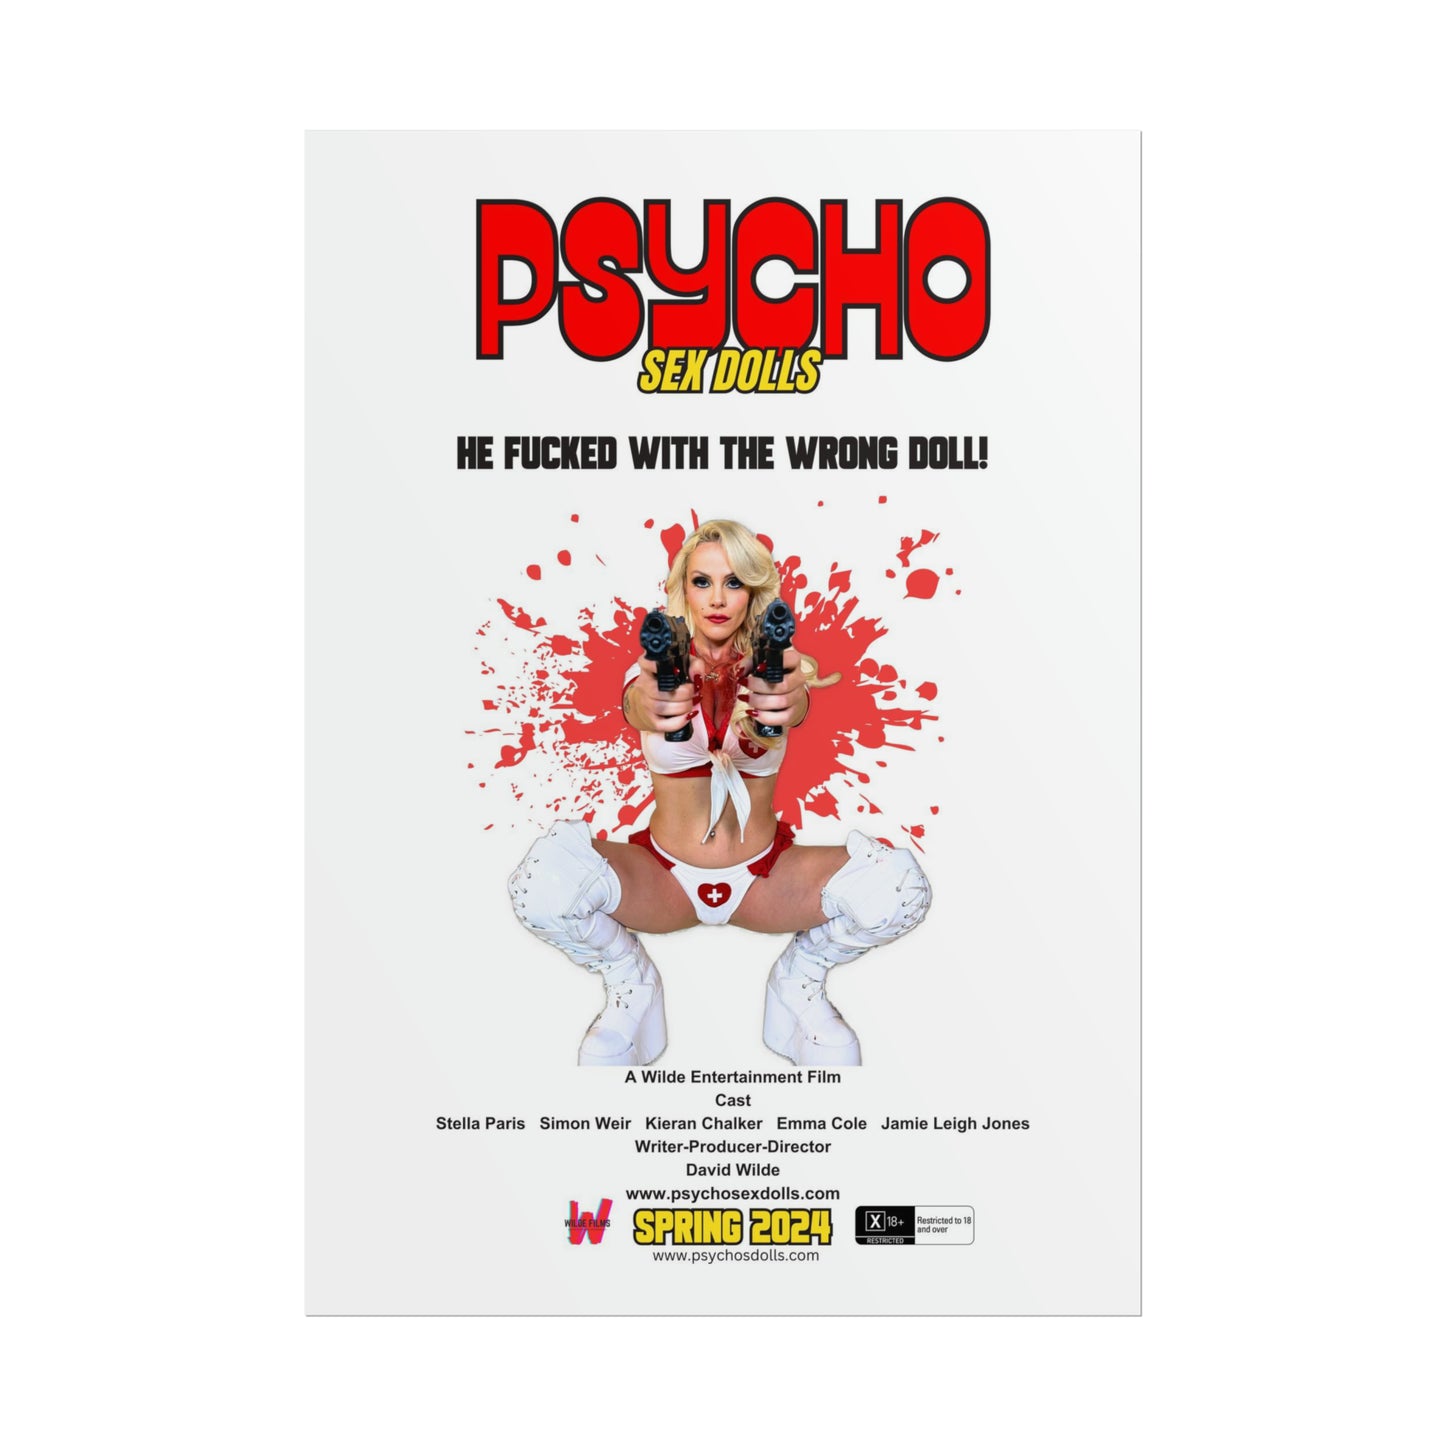 Psycho S*X Dolls movie poster (Get your name on poster!)